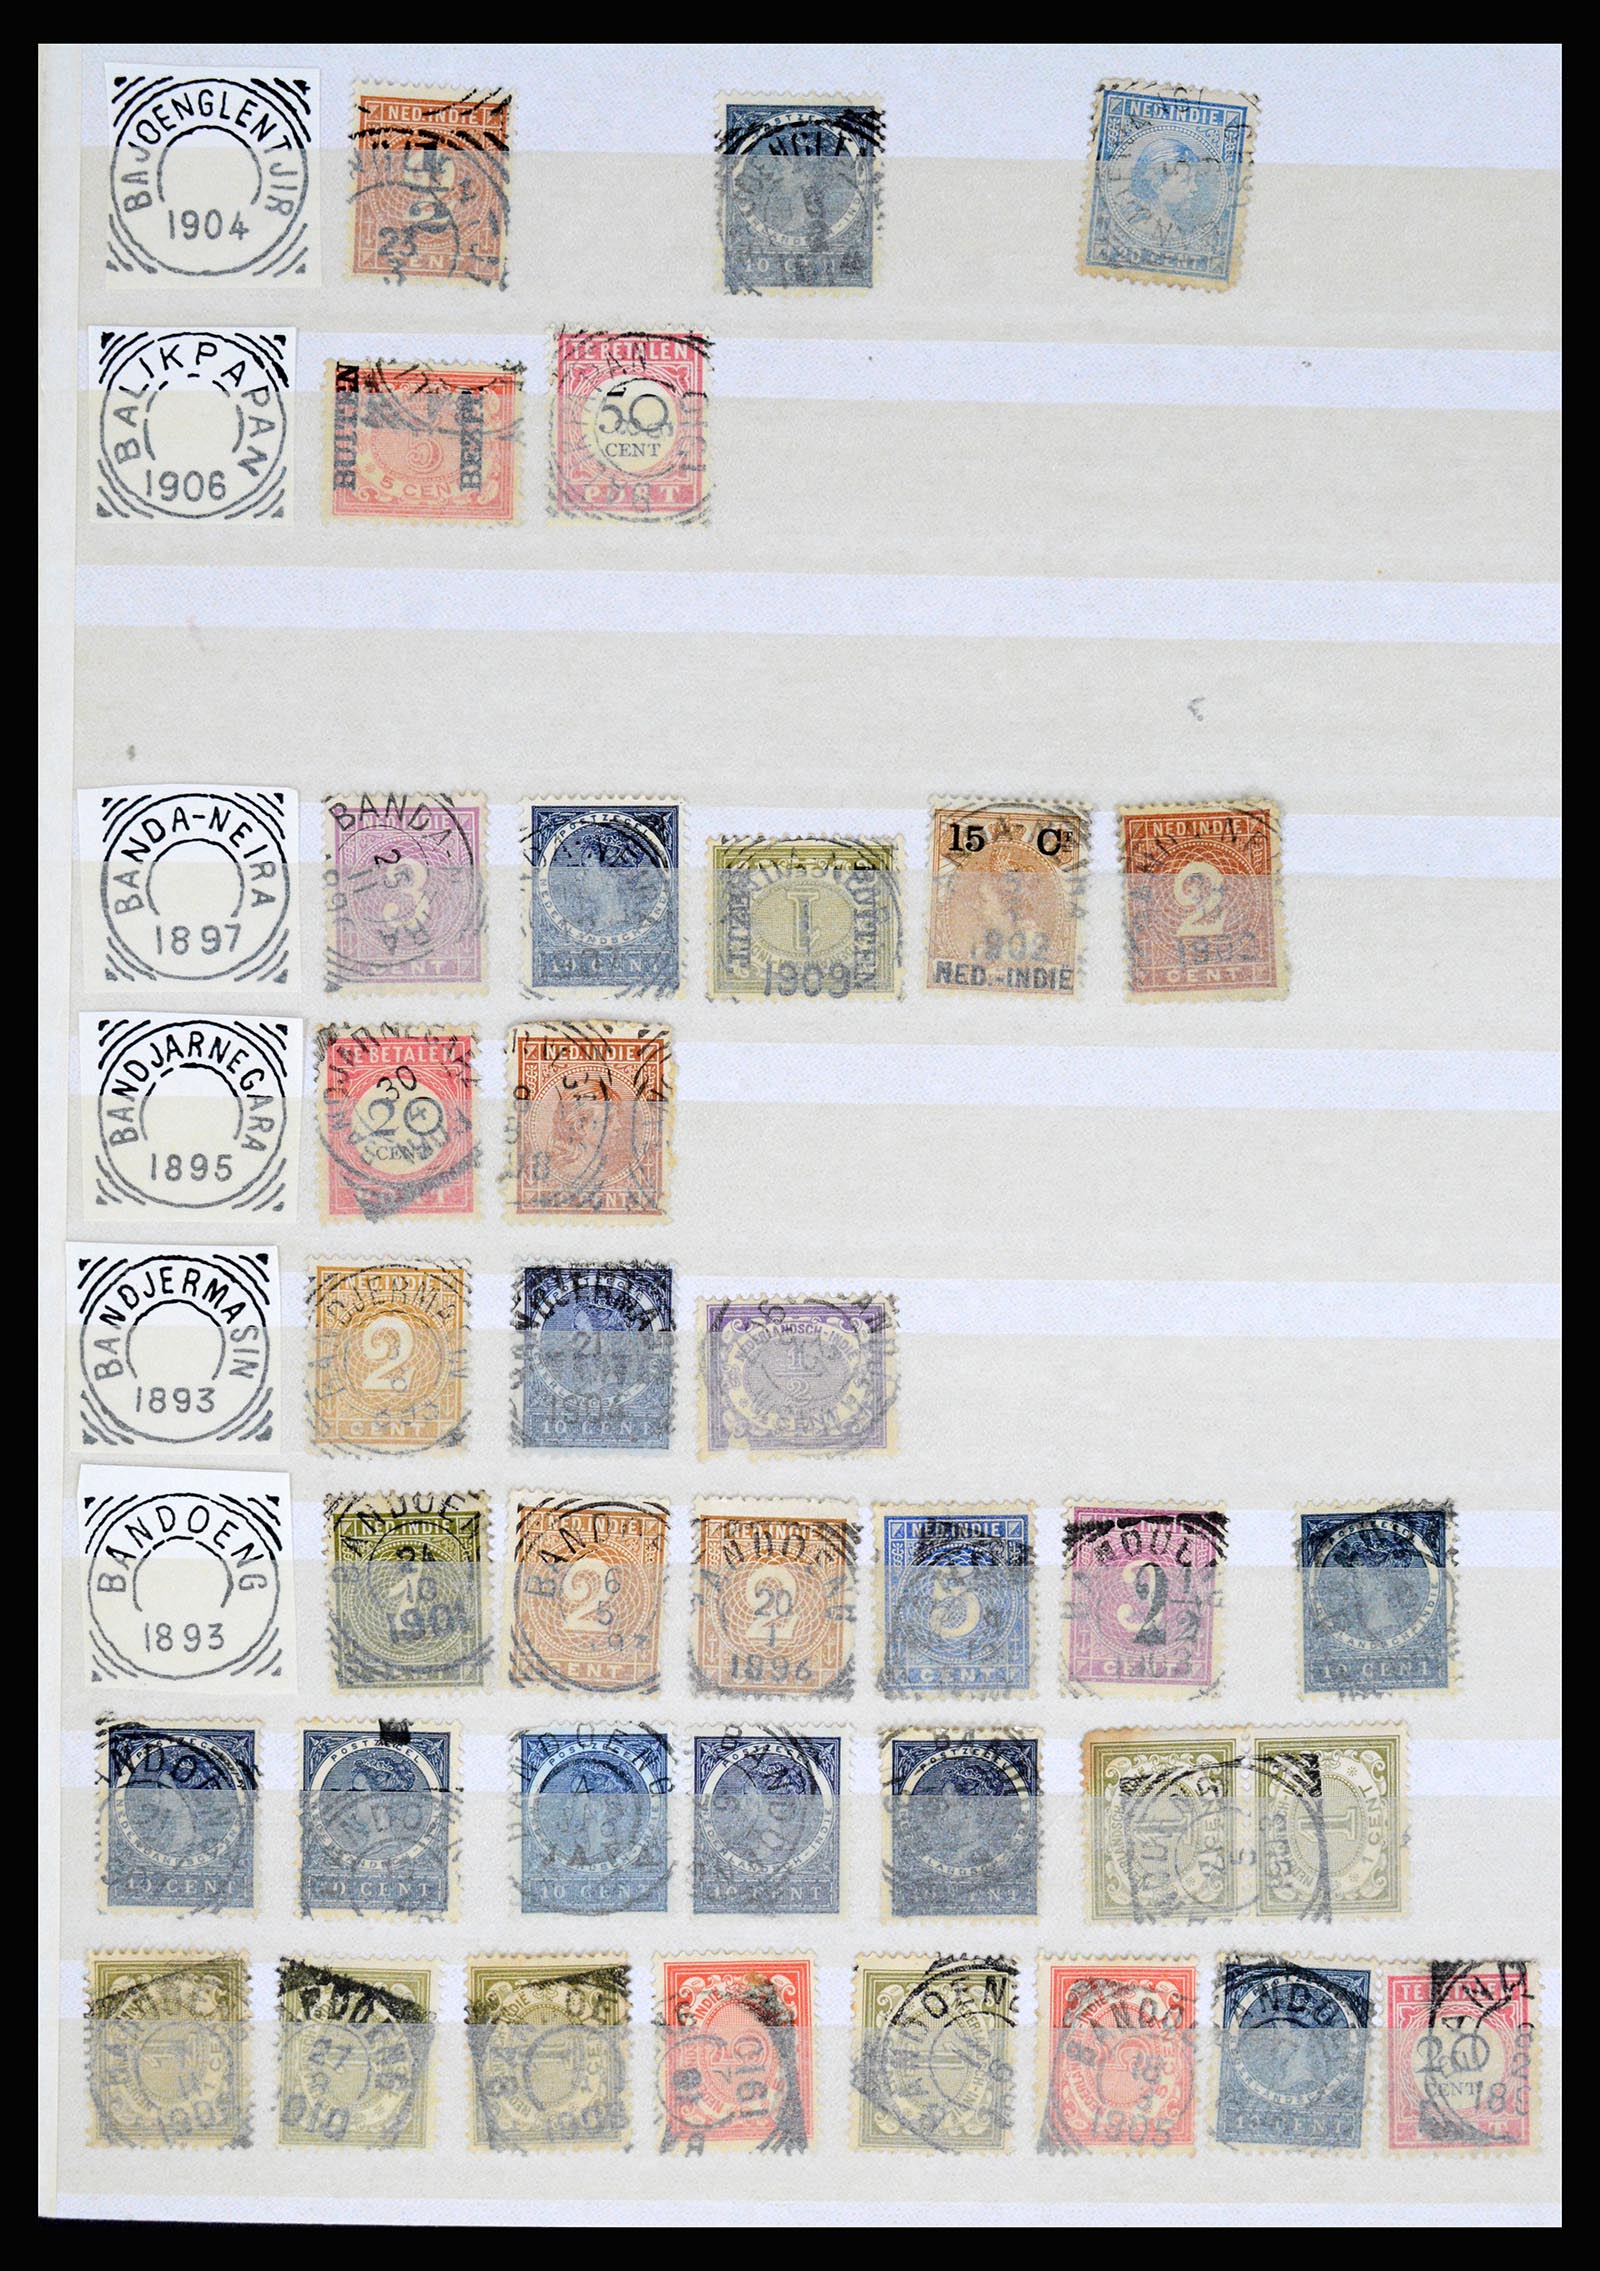 36839 061 - Stamp collection 36839 Dutch east Indies square cancels.